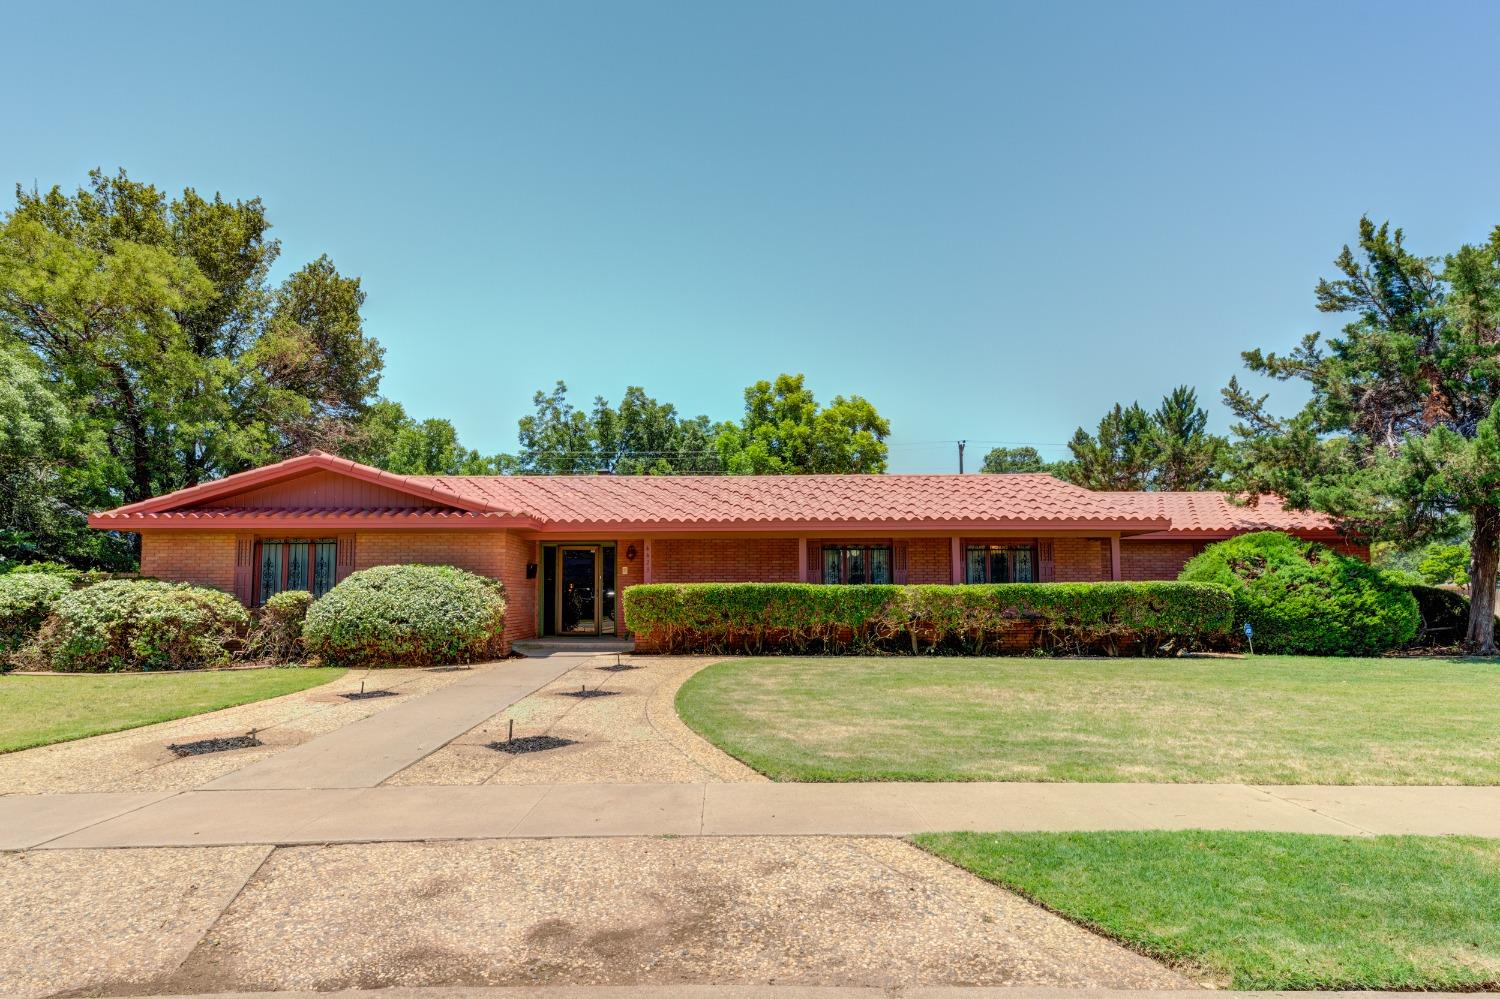 A Mid-Century Masterpiece, Beautifully Maintained and Nestled in the Heart of One of Lubbock's Most Prestigious Neighborhoods. 3 Bedrooms, 3.5 Baths, 2-Car Garage w/ extra parking. A once in a lifetime opportunity to own a gorgeously authentic & luxurious 1960's home with top of the line craftsmanship & high-end touches throughout-terrazzo tile sweeps from the front door to the back, dazzling mosaic tiles, nearly flawless original wall-coverings, gorgeous cabinetry & special light fixtures sprinkled throughout. Large rooms, tremendous storage & sophisticated style- On a nearly 1/2 acre corner lot in Rushland Park, the most sought-after area close to downtown, Texas Tech & LCU and Lubbock's Medical District.